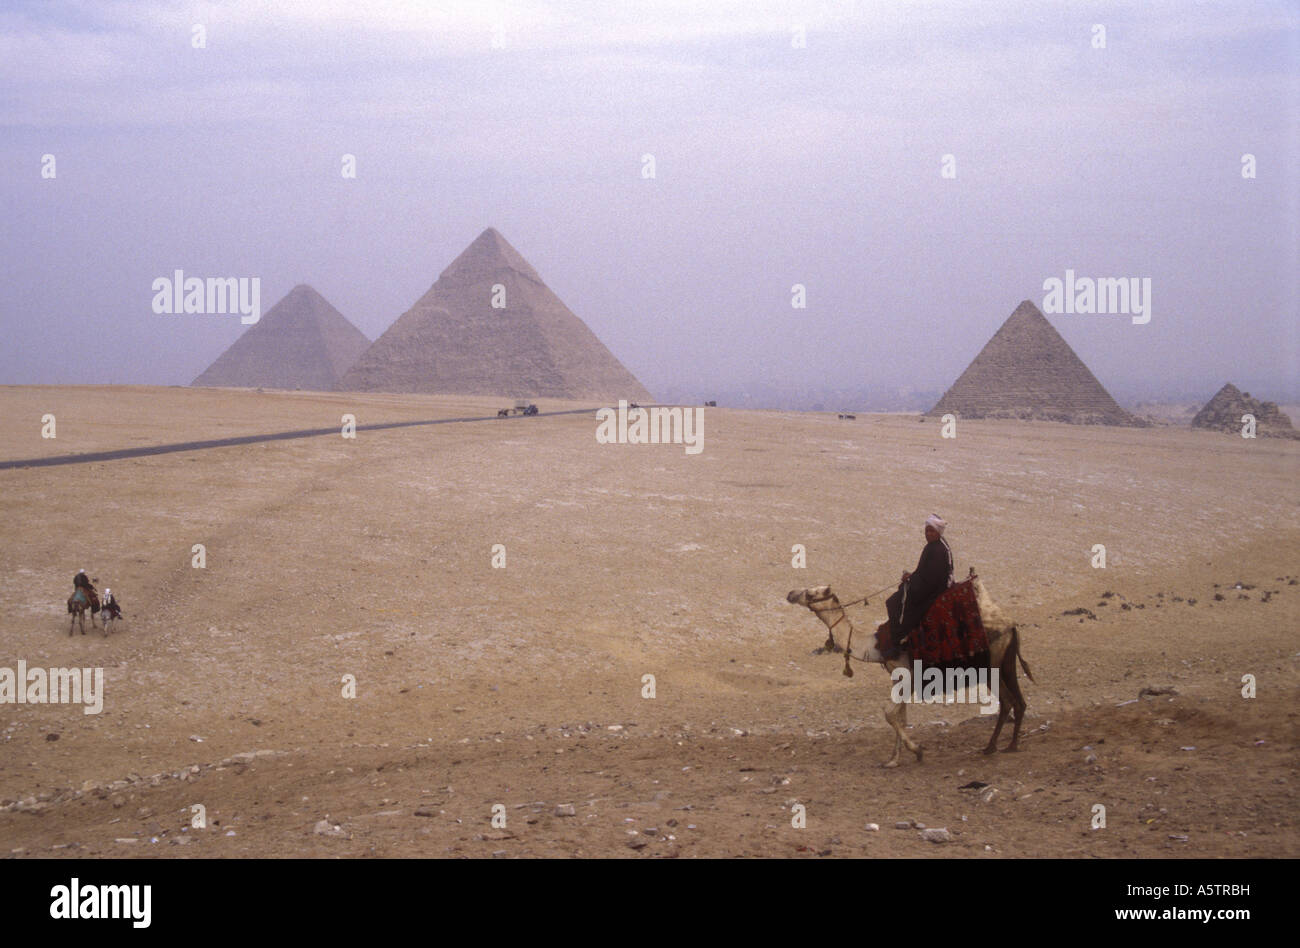 The Pyramids of Giza left Cheops centre Chephren right Mycerinus in Cairo Egypt Camel rider in the foreground Stock Photo